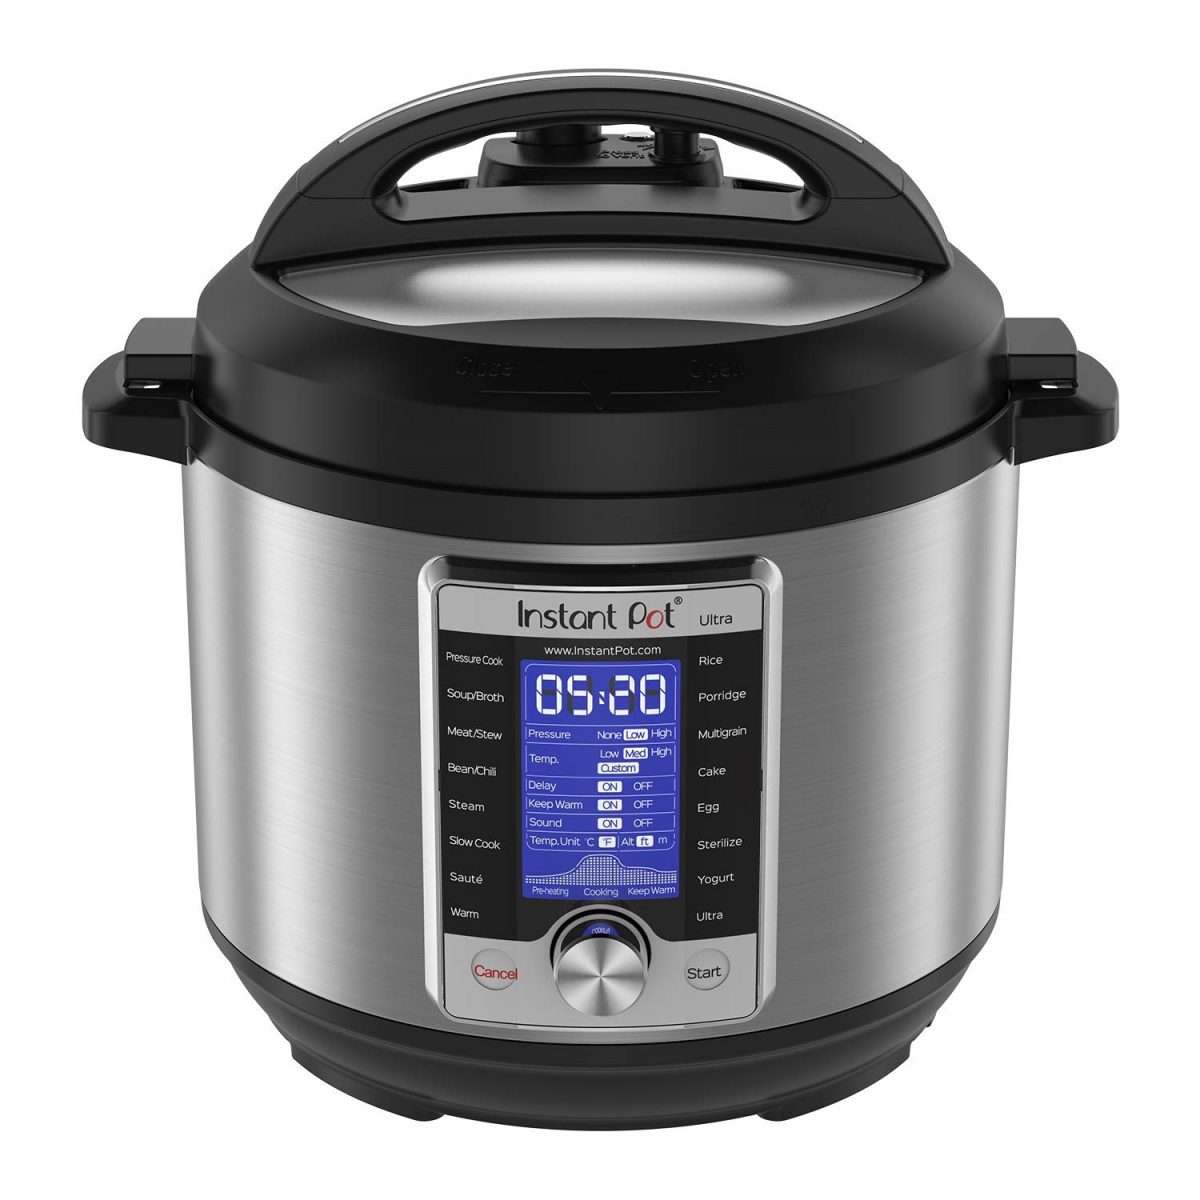 Instant Pot Duo: To Buy or Not in 2021